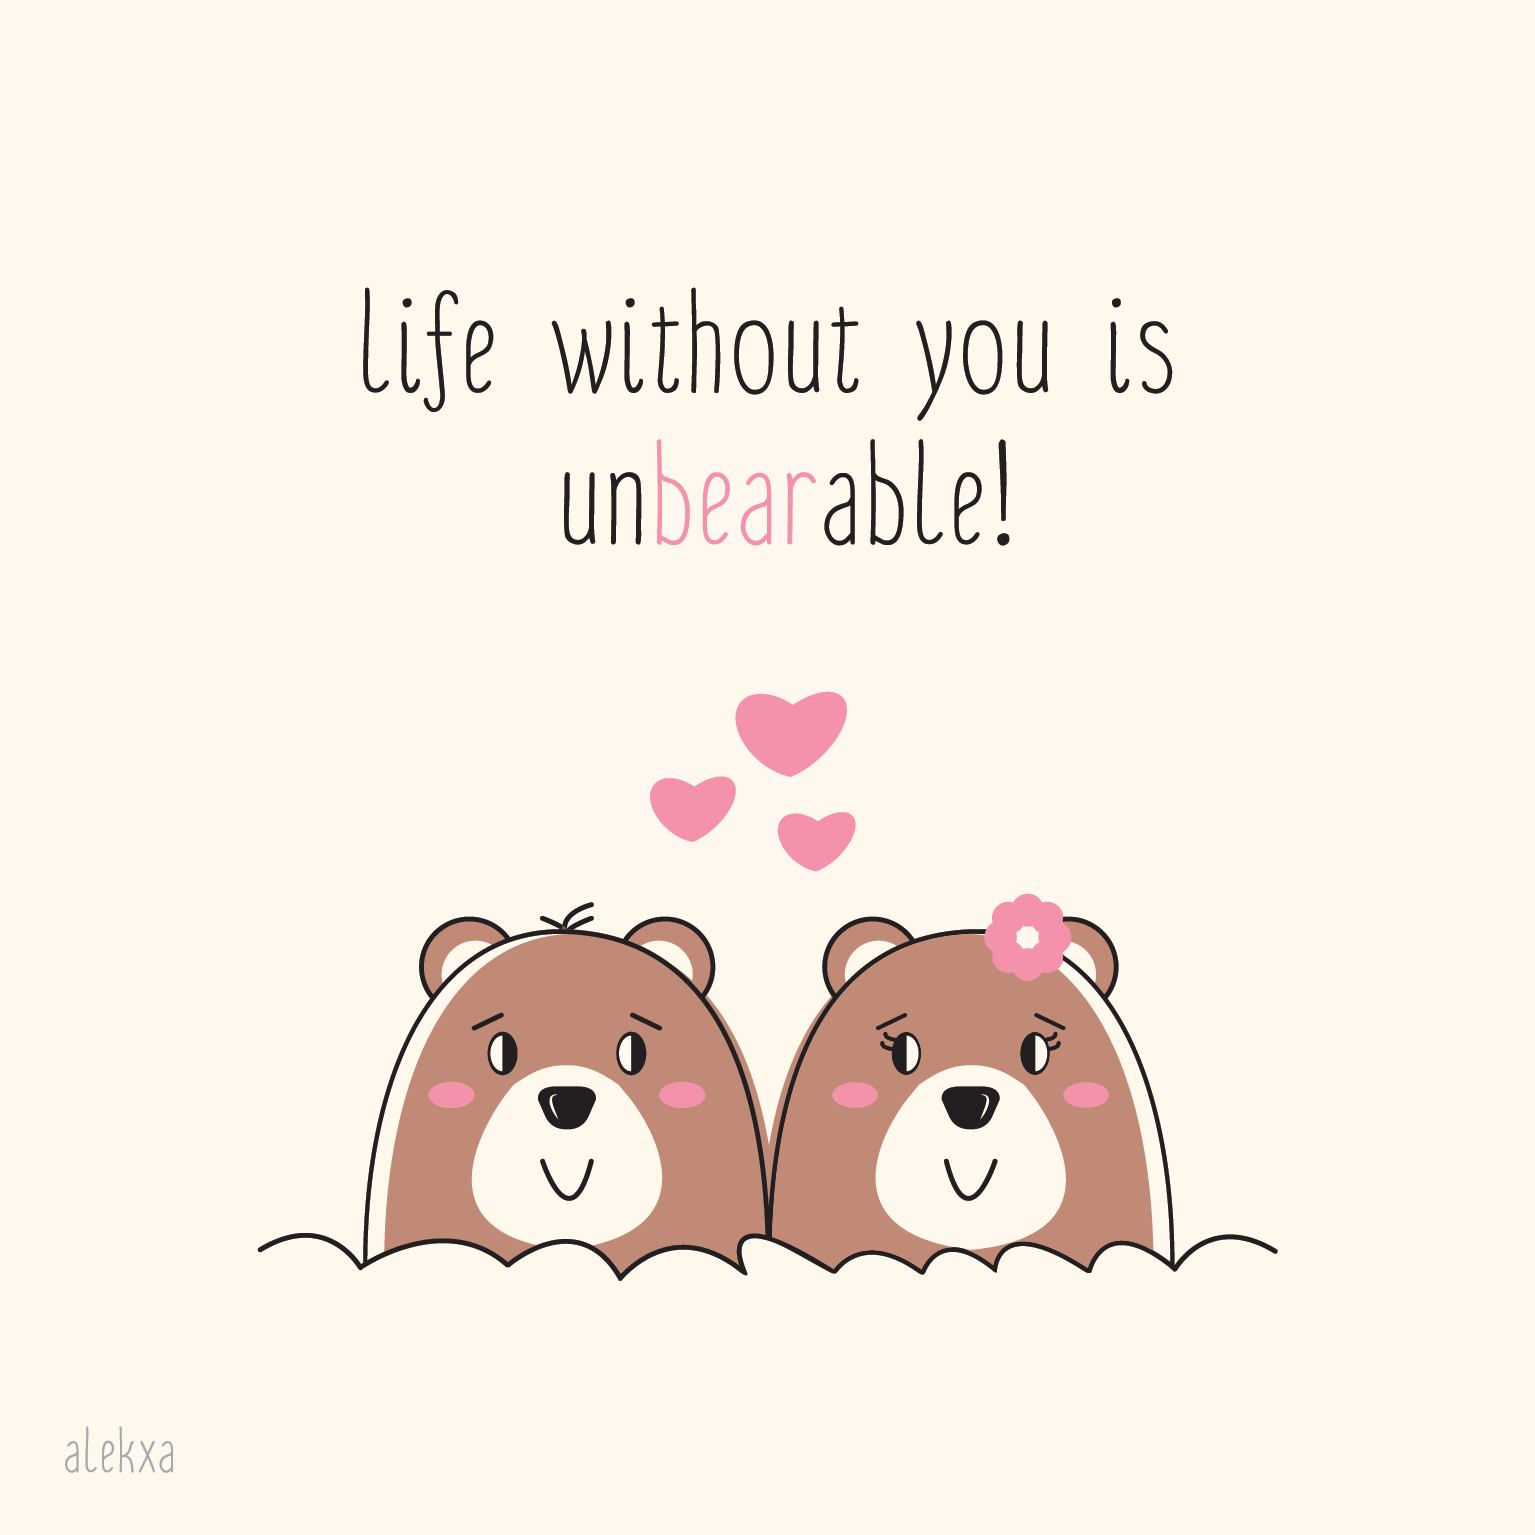 My love for you is unbearable